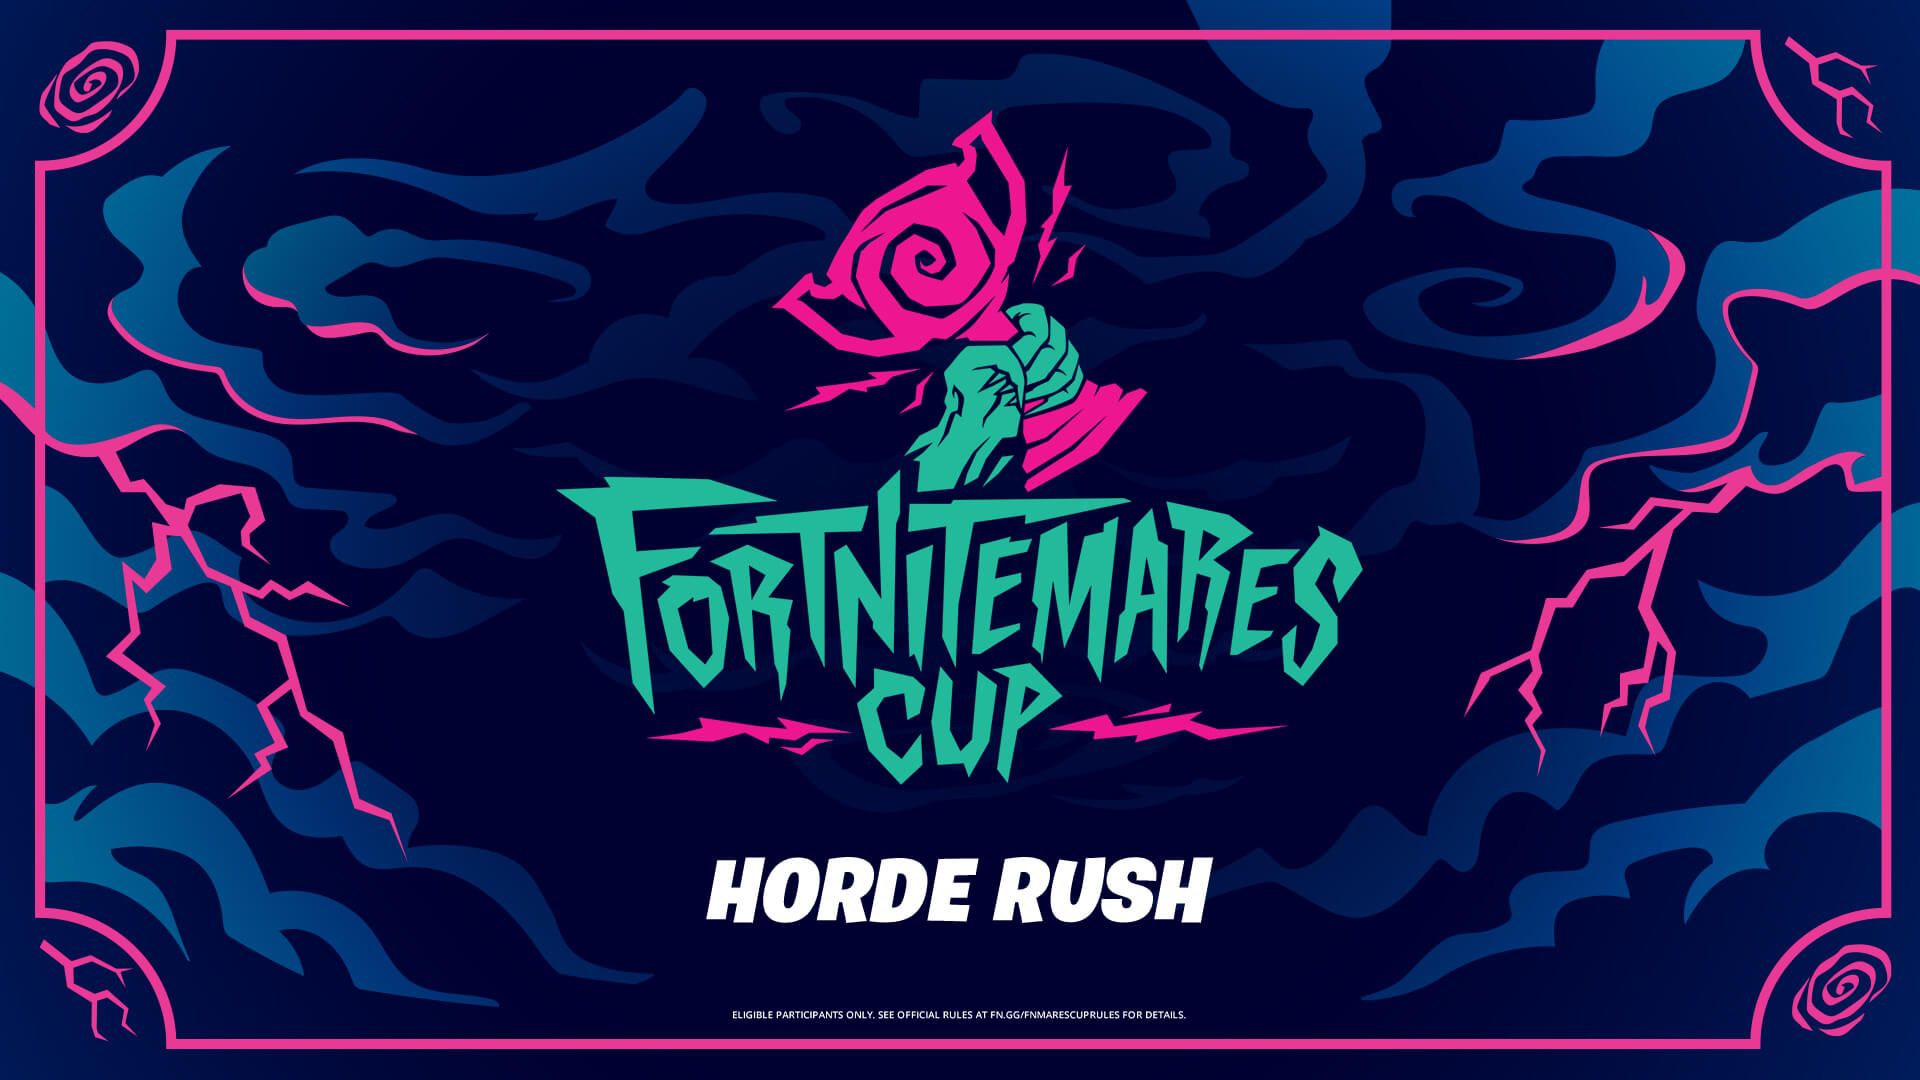 The Fortnitemares Cup begins October 23, free cosmetics to be awarded